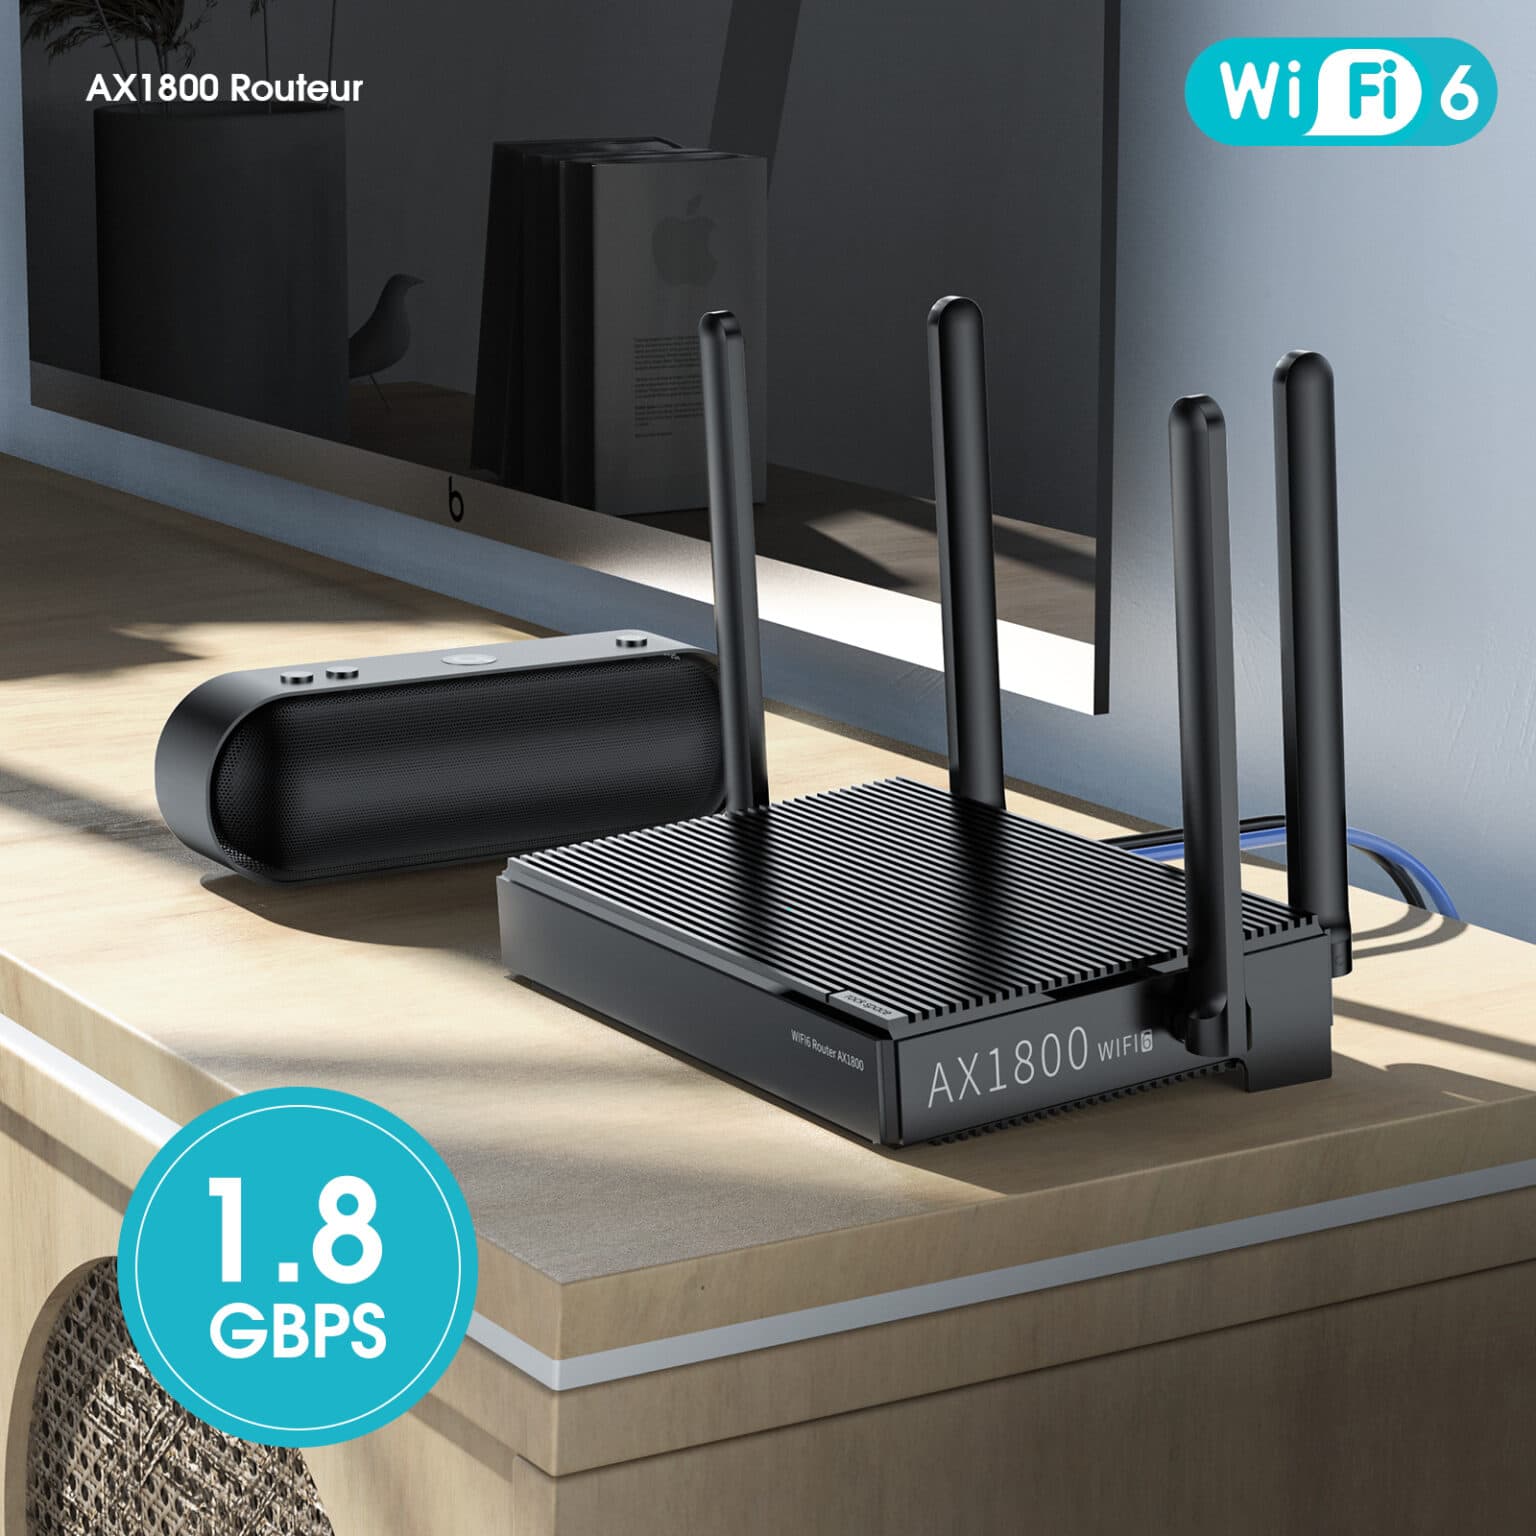 With an Amazon coupon, rock space's new Wi-Fi 6 router is just $56.